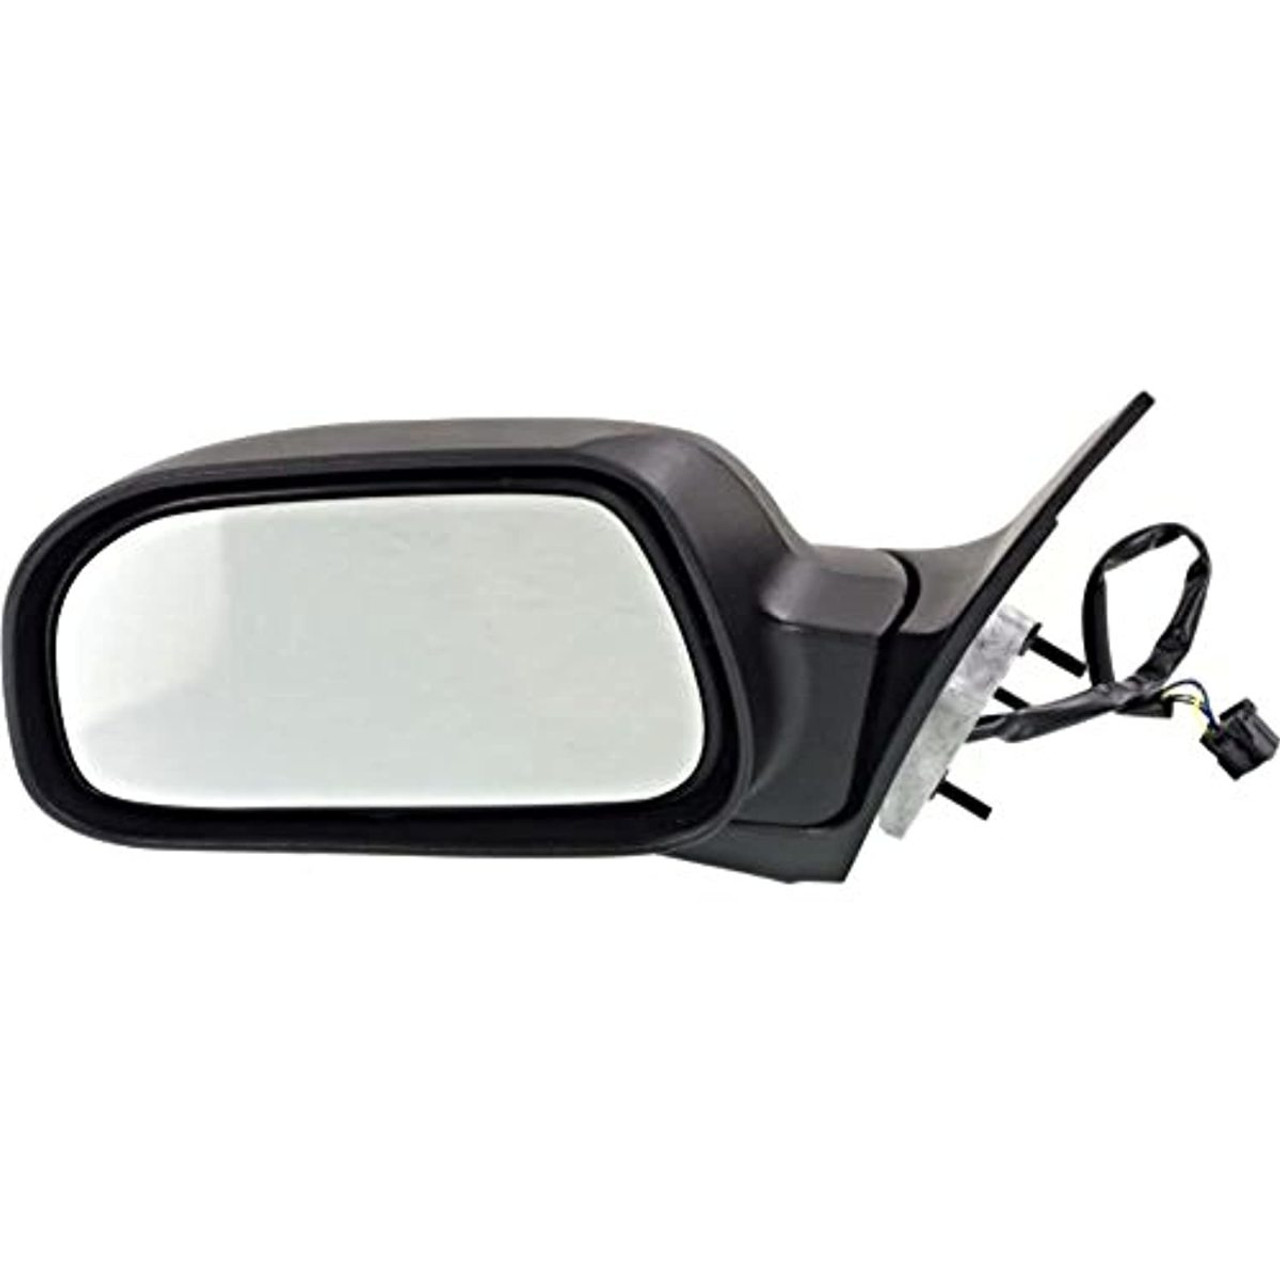 Fits 06-08 Pacifica Left Driver Mirror Man Fold With Heat No Auto Dim or Memory